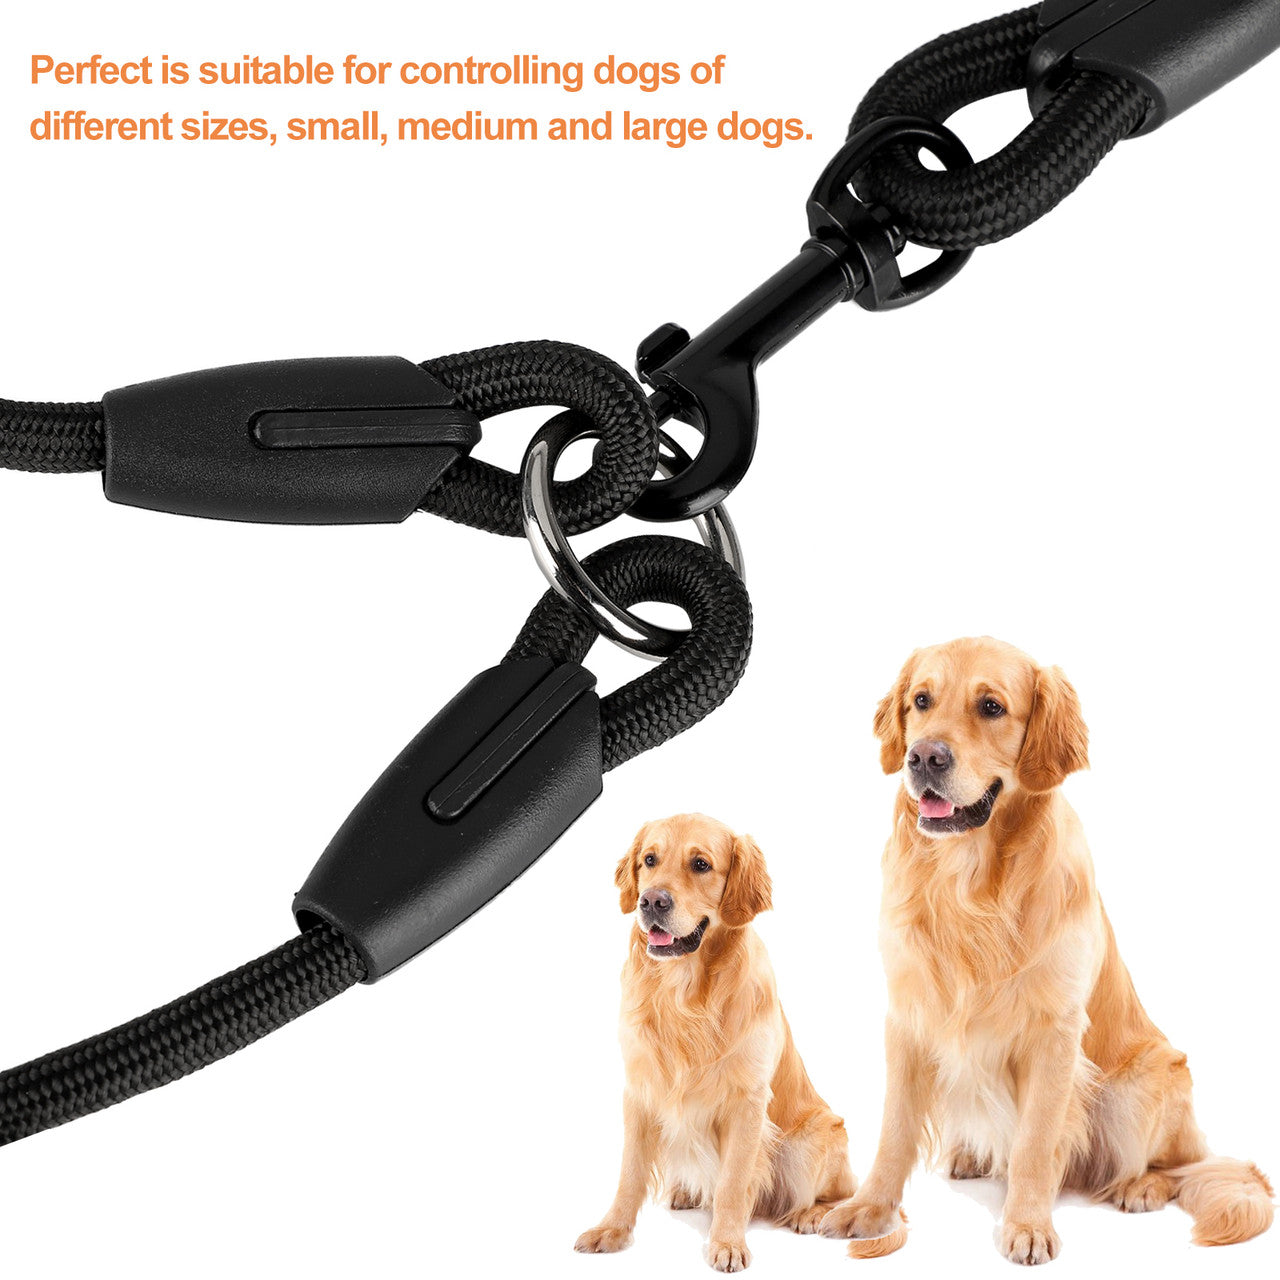 Double Dog Leash, Adjustable Heavy Duty Double Leash for Dogs Dual Dog Leash 360掳Tangle Free & Soft Handle Two Dog Leash, Walking & Training Leash Two Dogs,fit for Medium Dogs